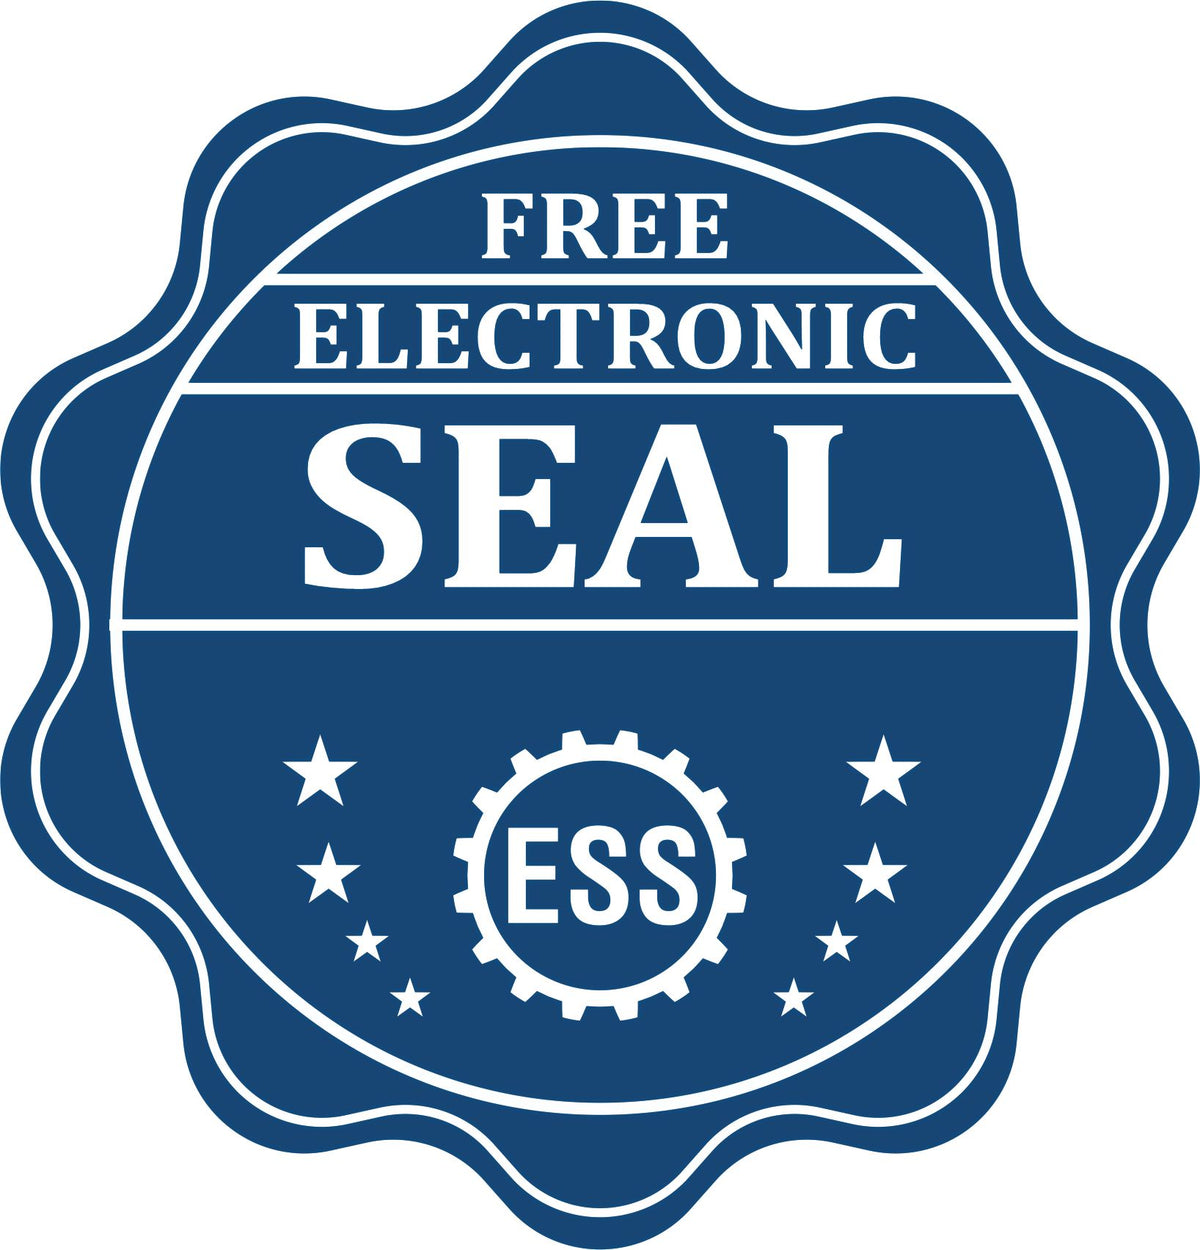 A badge showing a free electronic seal for the Heavy-Duty Oregon Rectangular Notary Stamp with stars and the ESS gear on the emblem.